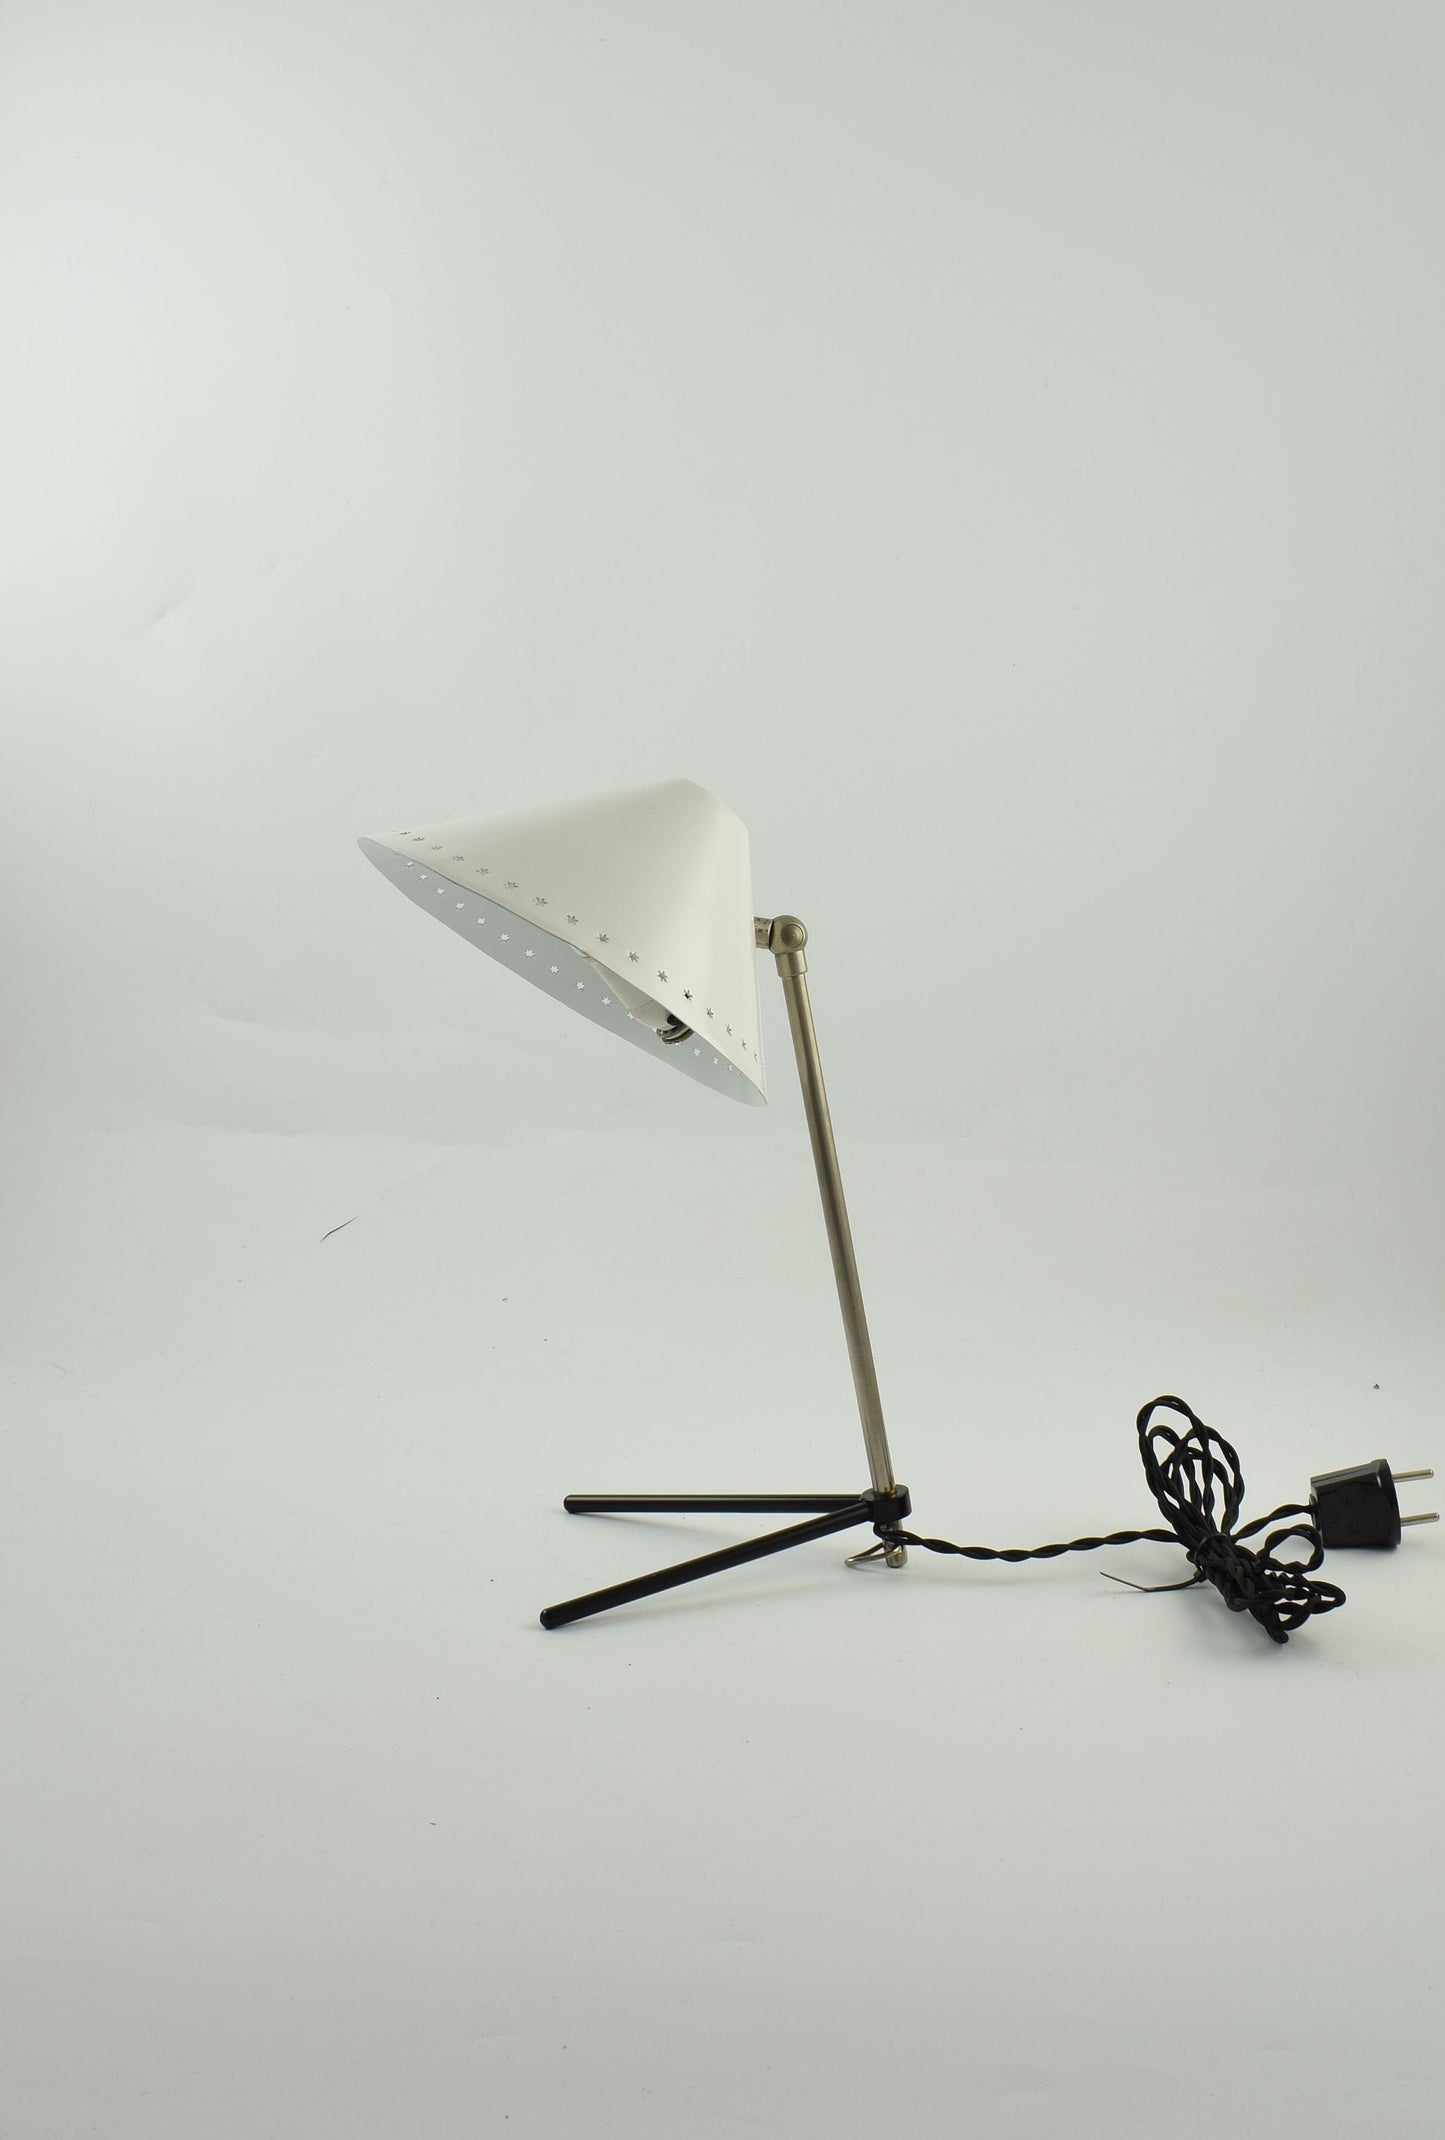 Pinocchio lamp or pinokkio lamp by H.Busquet from hala minimalist industrial icon from the fifties